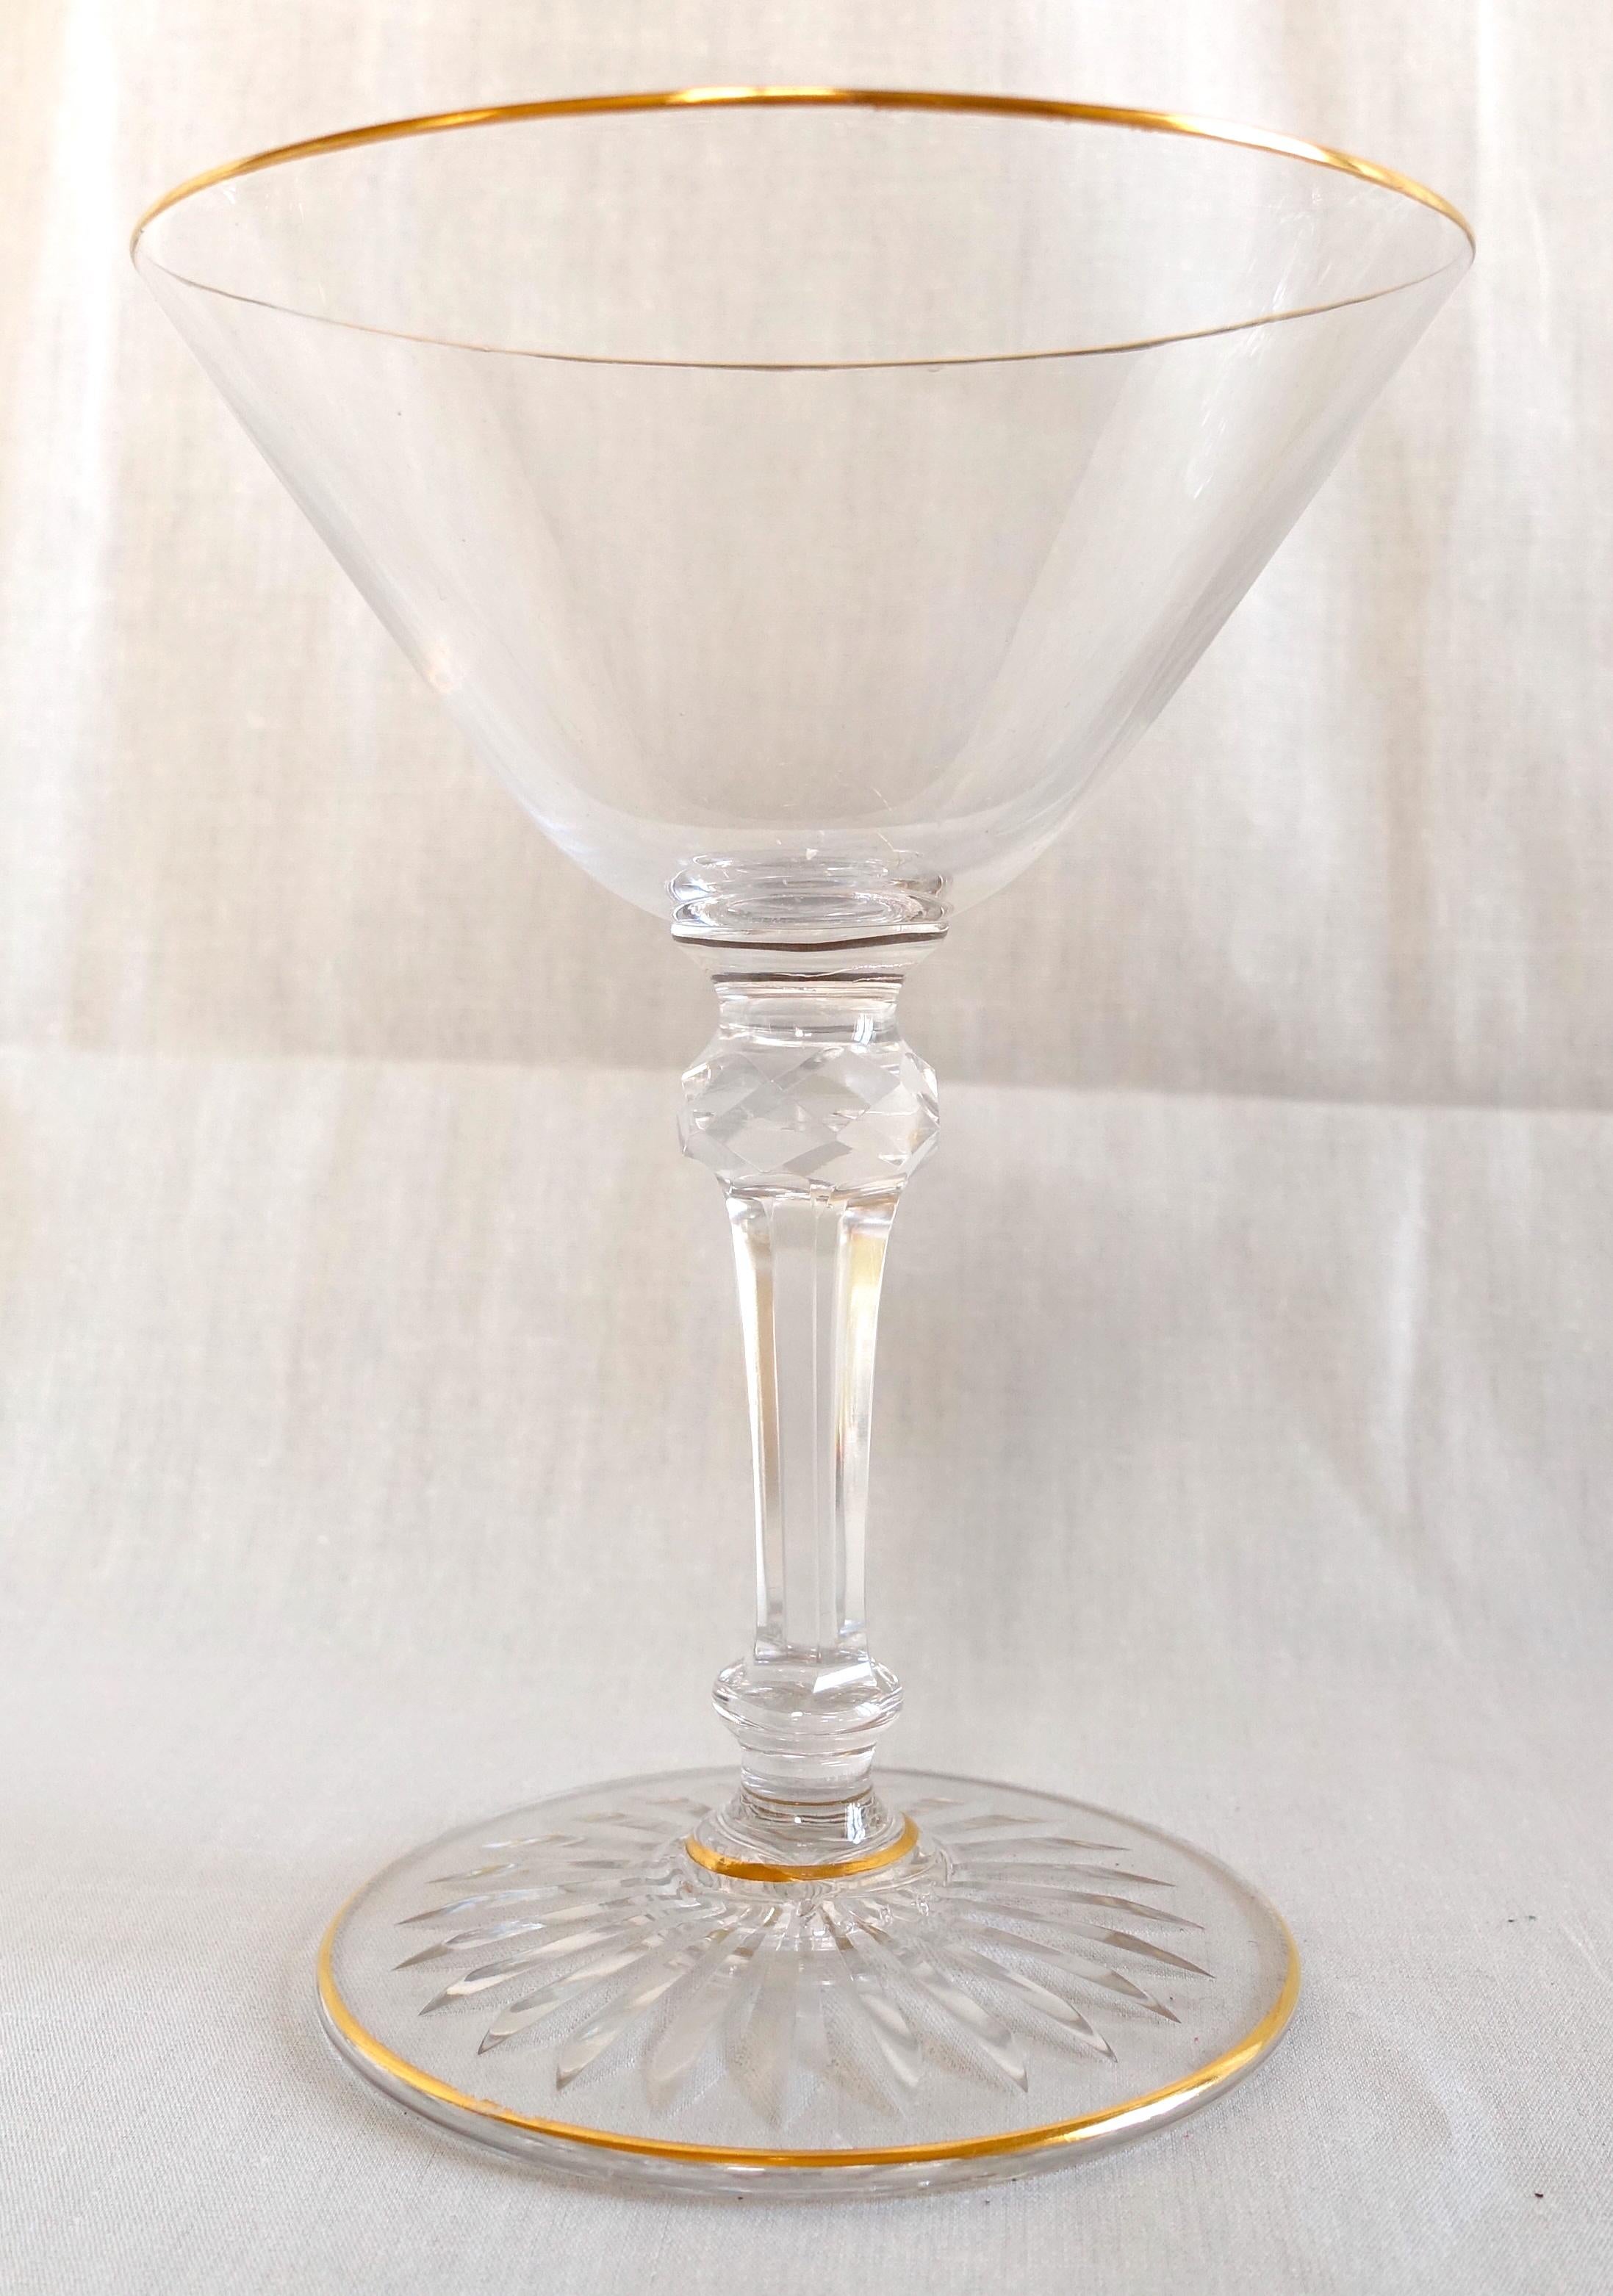 Baccarat crystal Champagne glass, early 20th century production circa 1900 - 1910. Elegant cut crystal model, star-shaped cut under the base, sophisticated cut foot, fine gold gilt on the edges.
Our glass is an antique production : it is not signed,